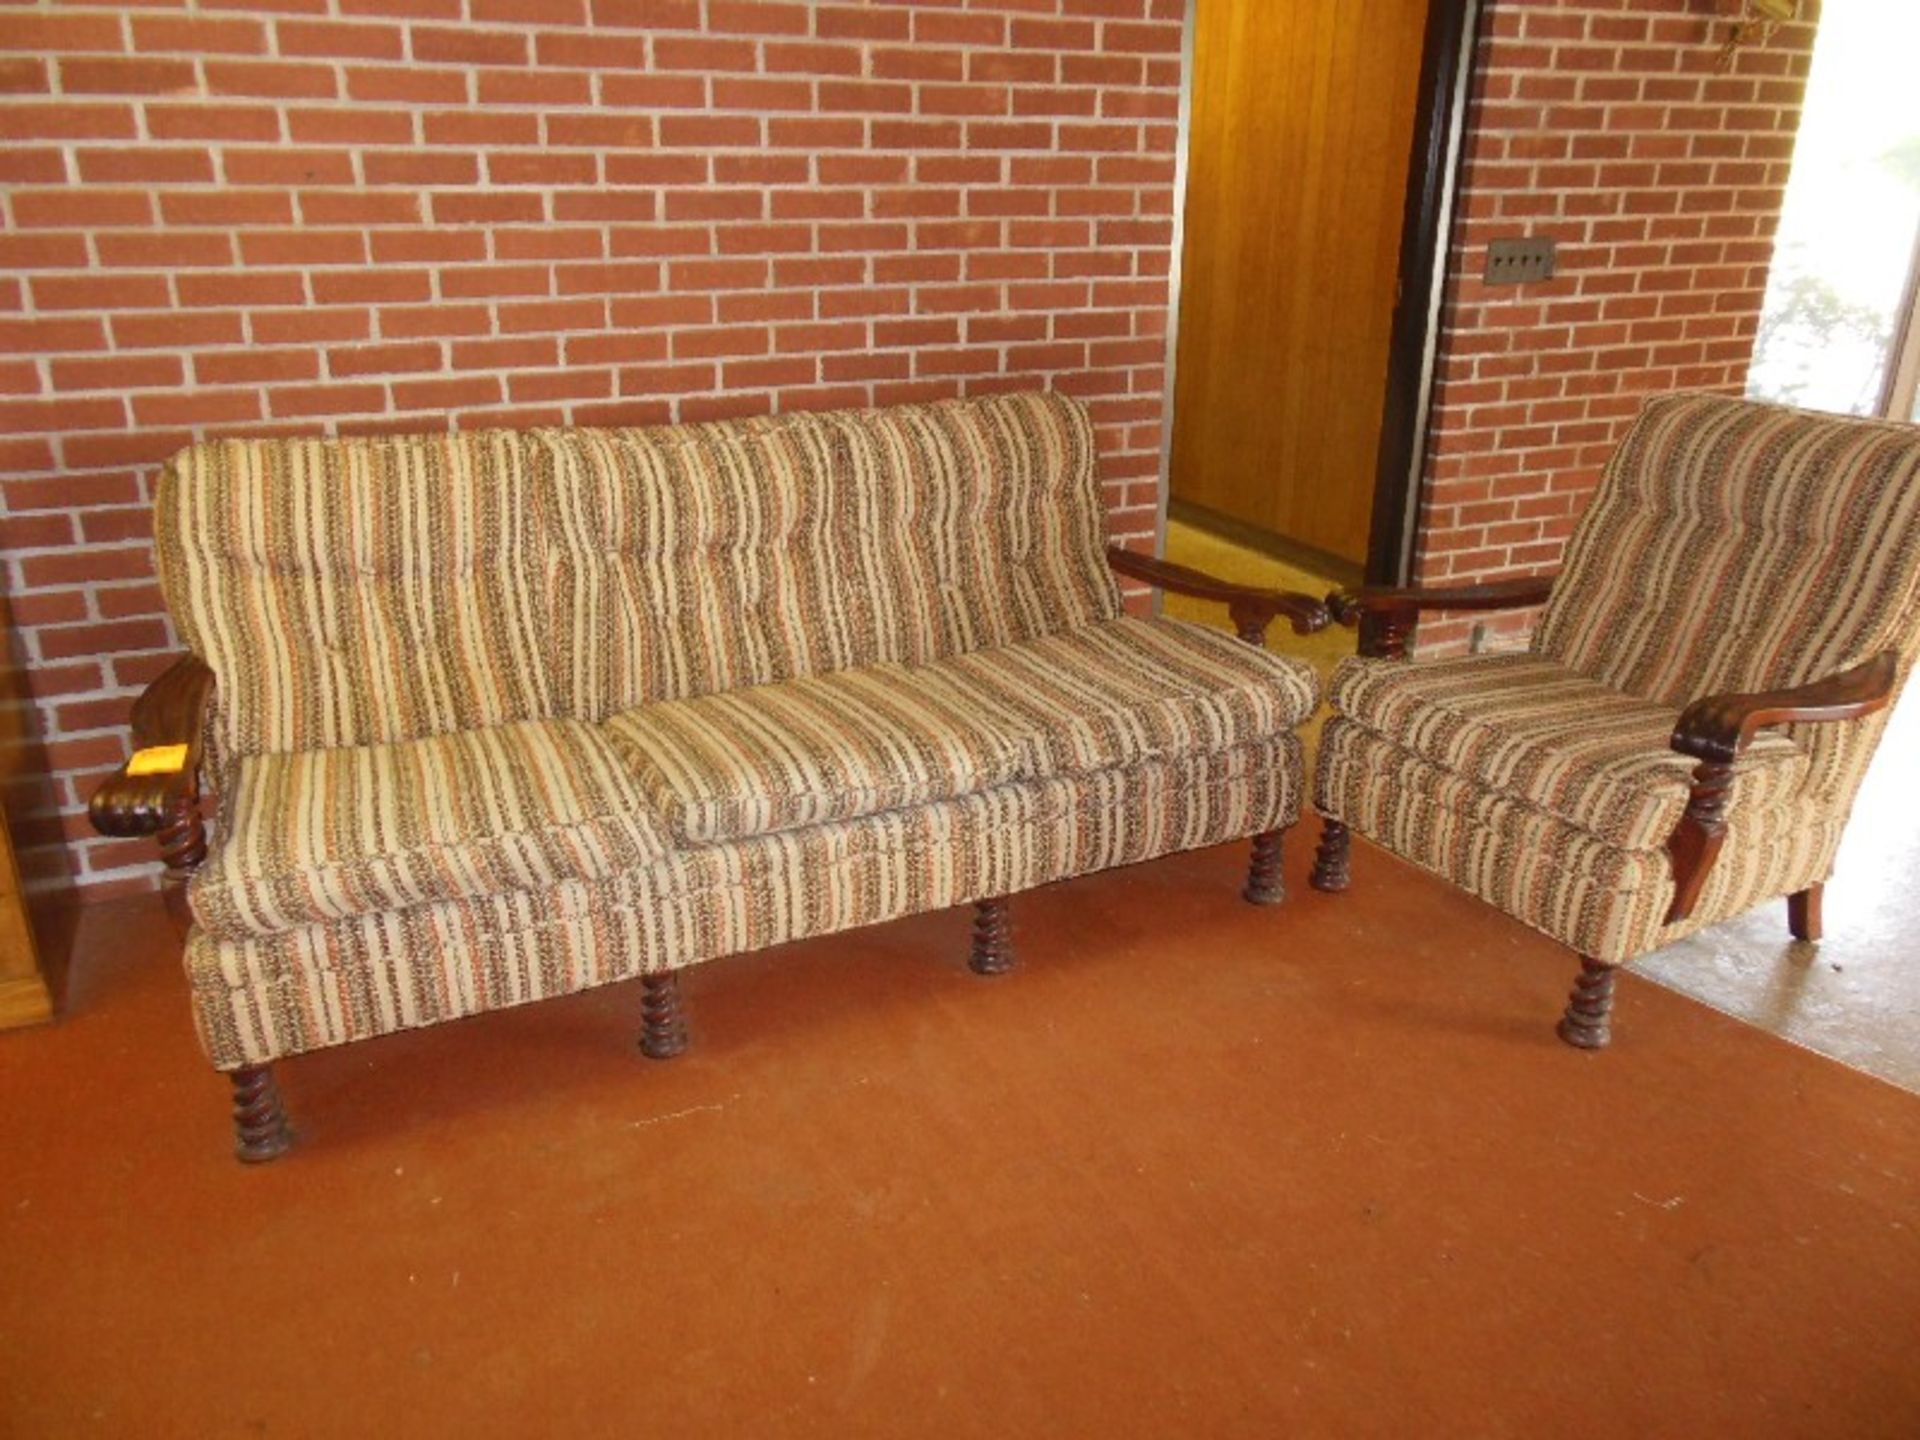 LOT: SOFAS & CHAIRS